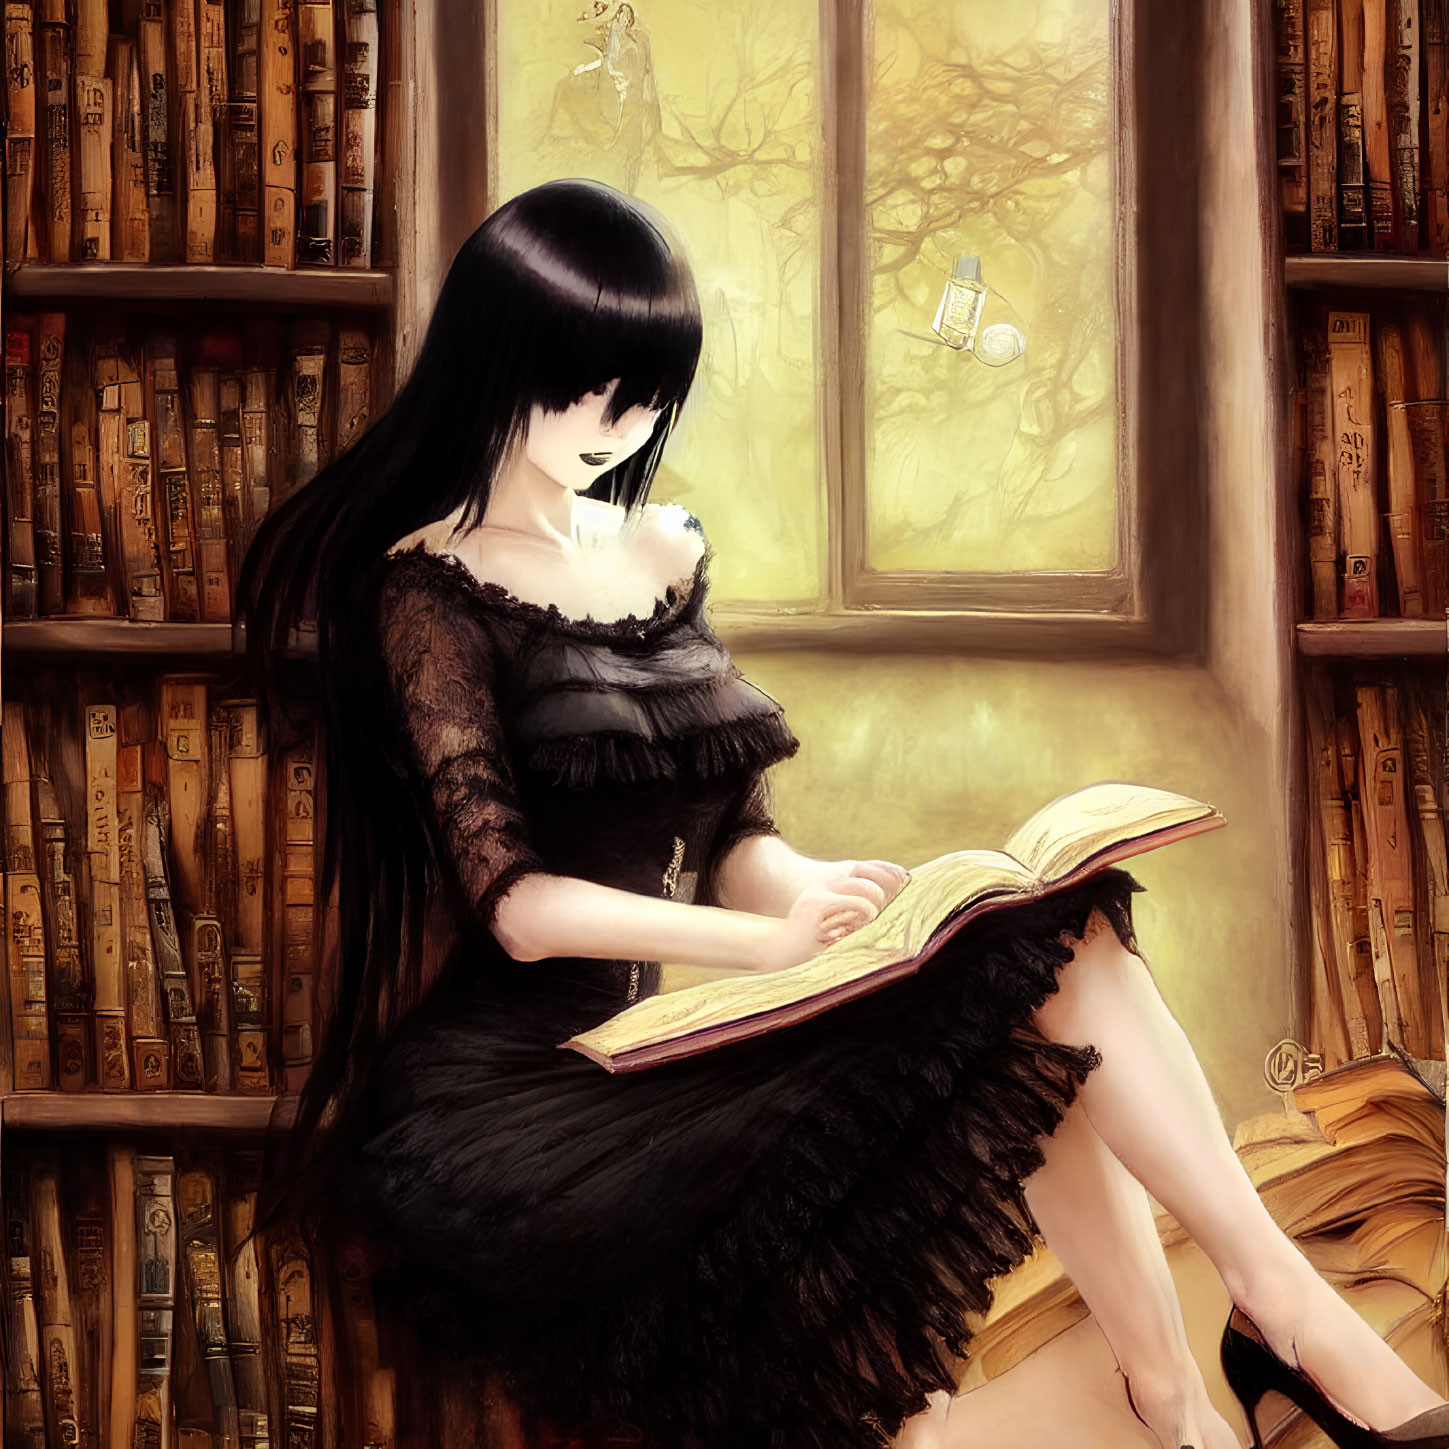 Gothic-style animated girl reading in warmly lit room